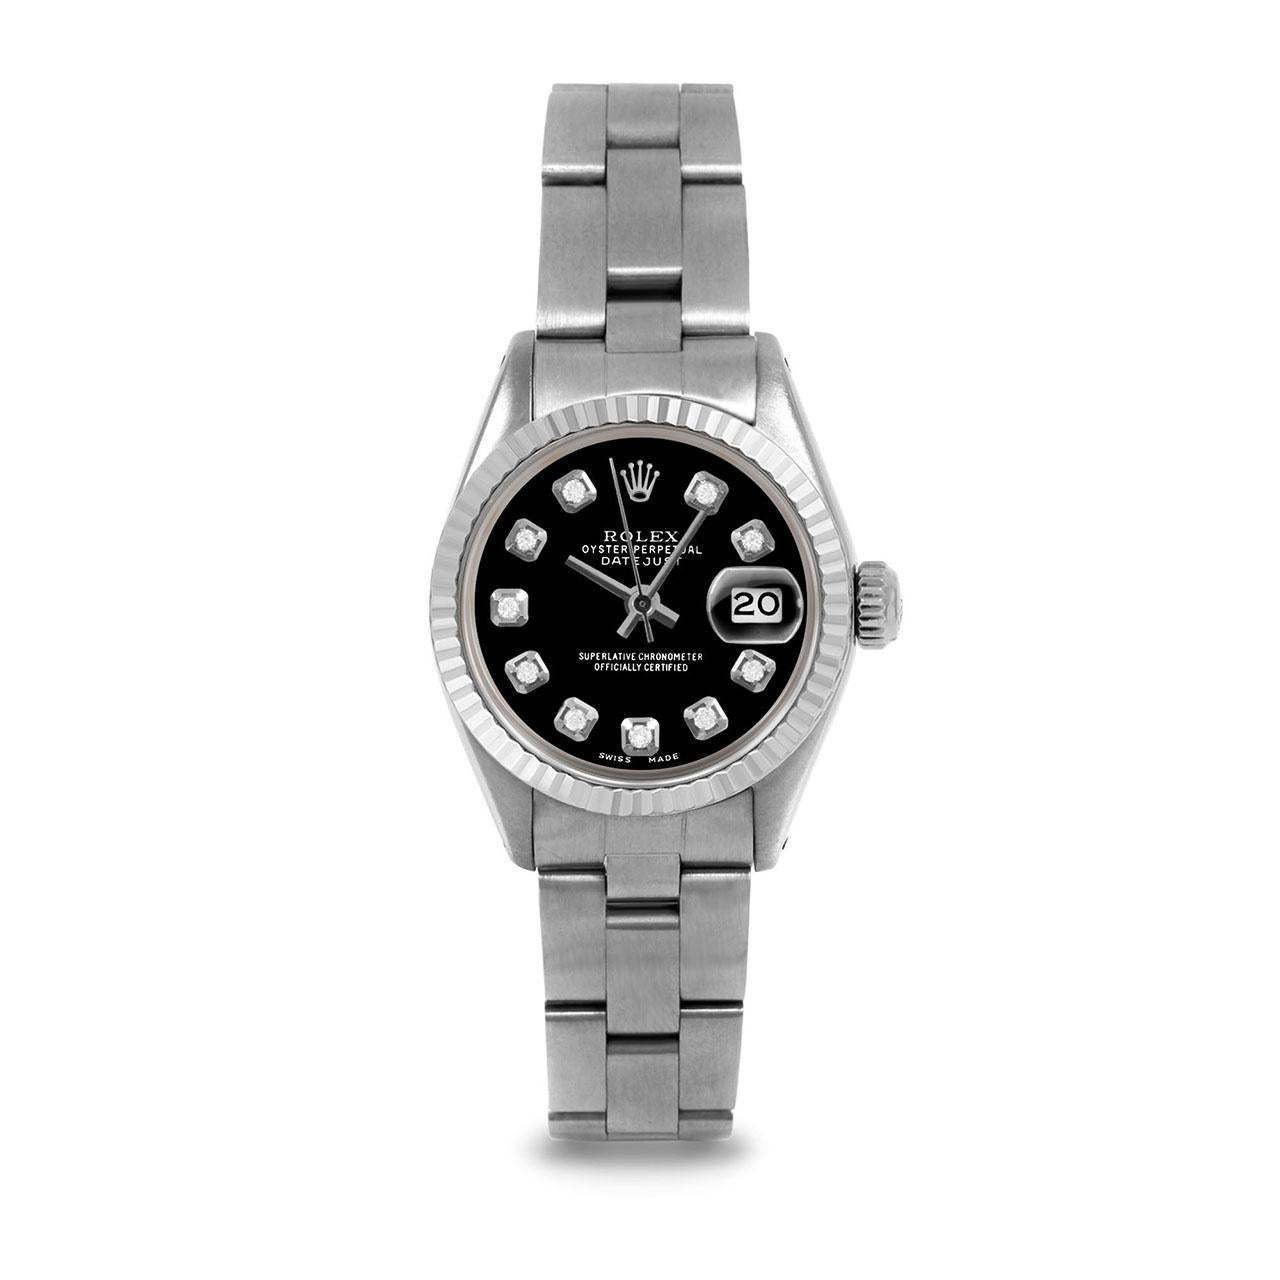 Pre-Owned Rolex 6917 Ladies 26mm Datejust Watch, Custom Black Diamond Dial & Fluted Bezel on Rolex Stainless Steel Oyster Band.   

SKU 6917-SS-BLK-DIA-AM-FLT-OYS


Brand/Model:        Rolex Datejust
Model Number:        6917
Style:       